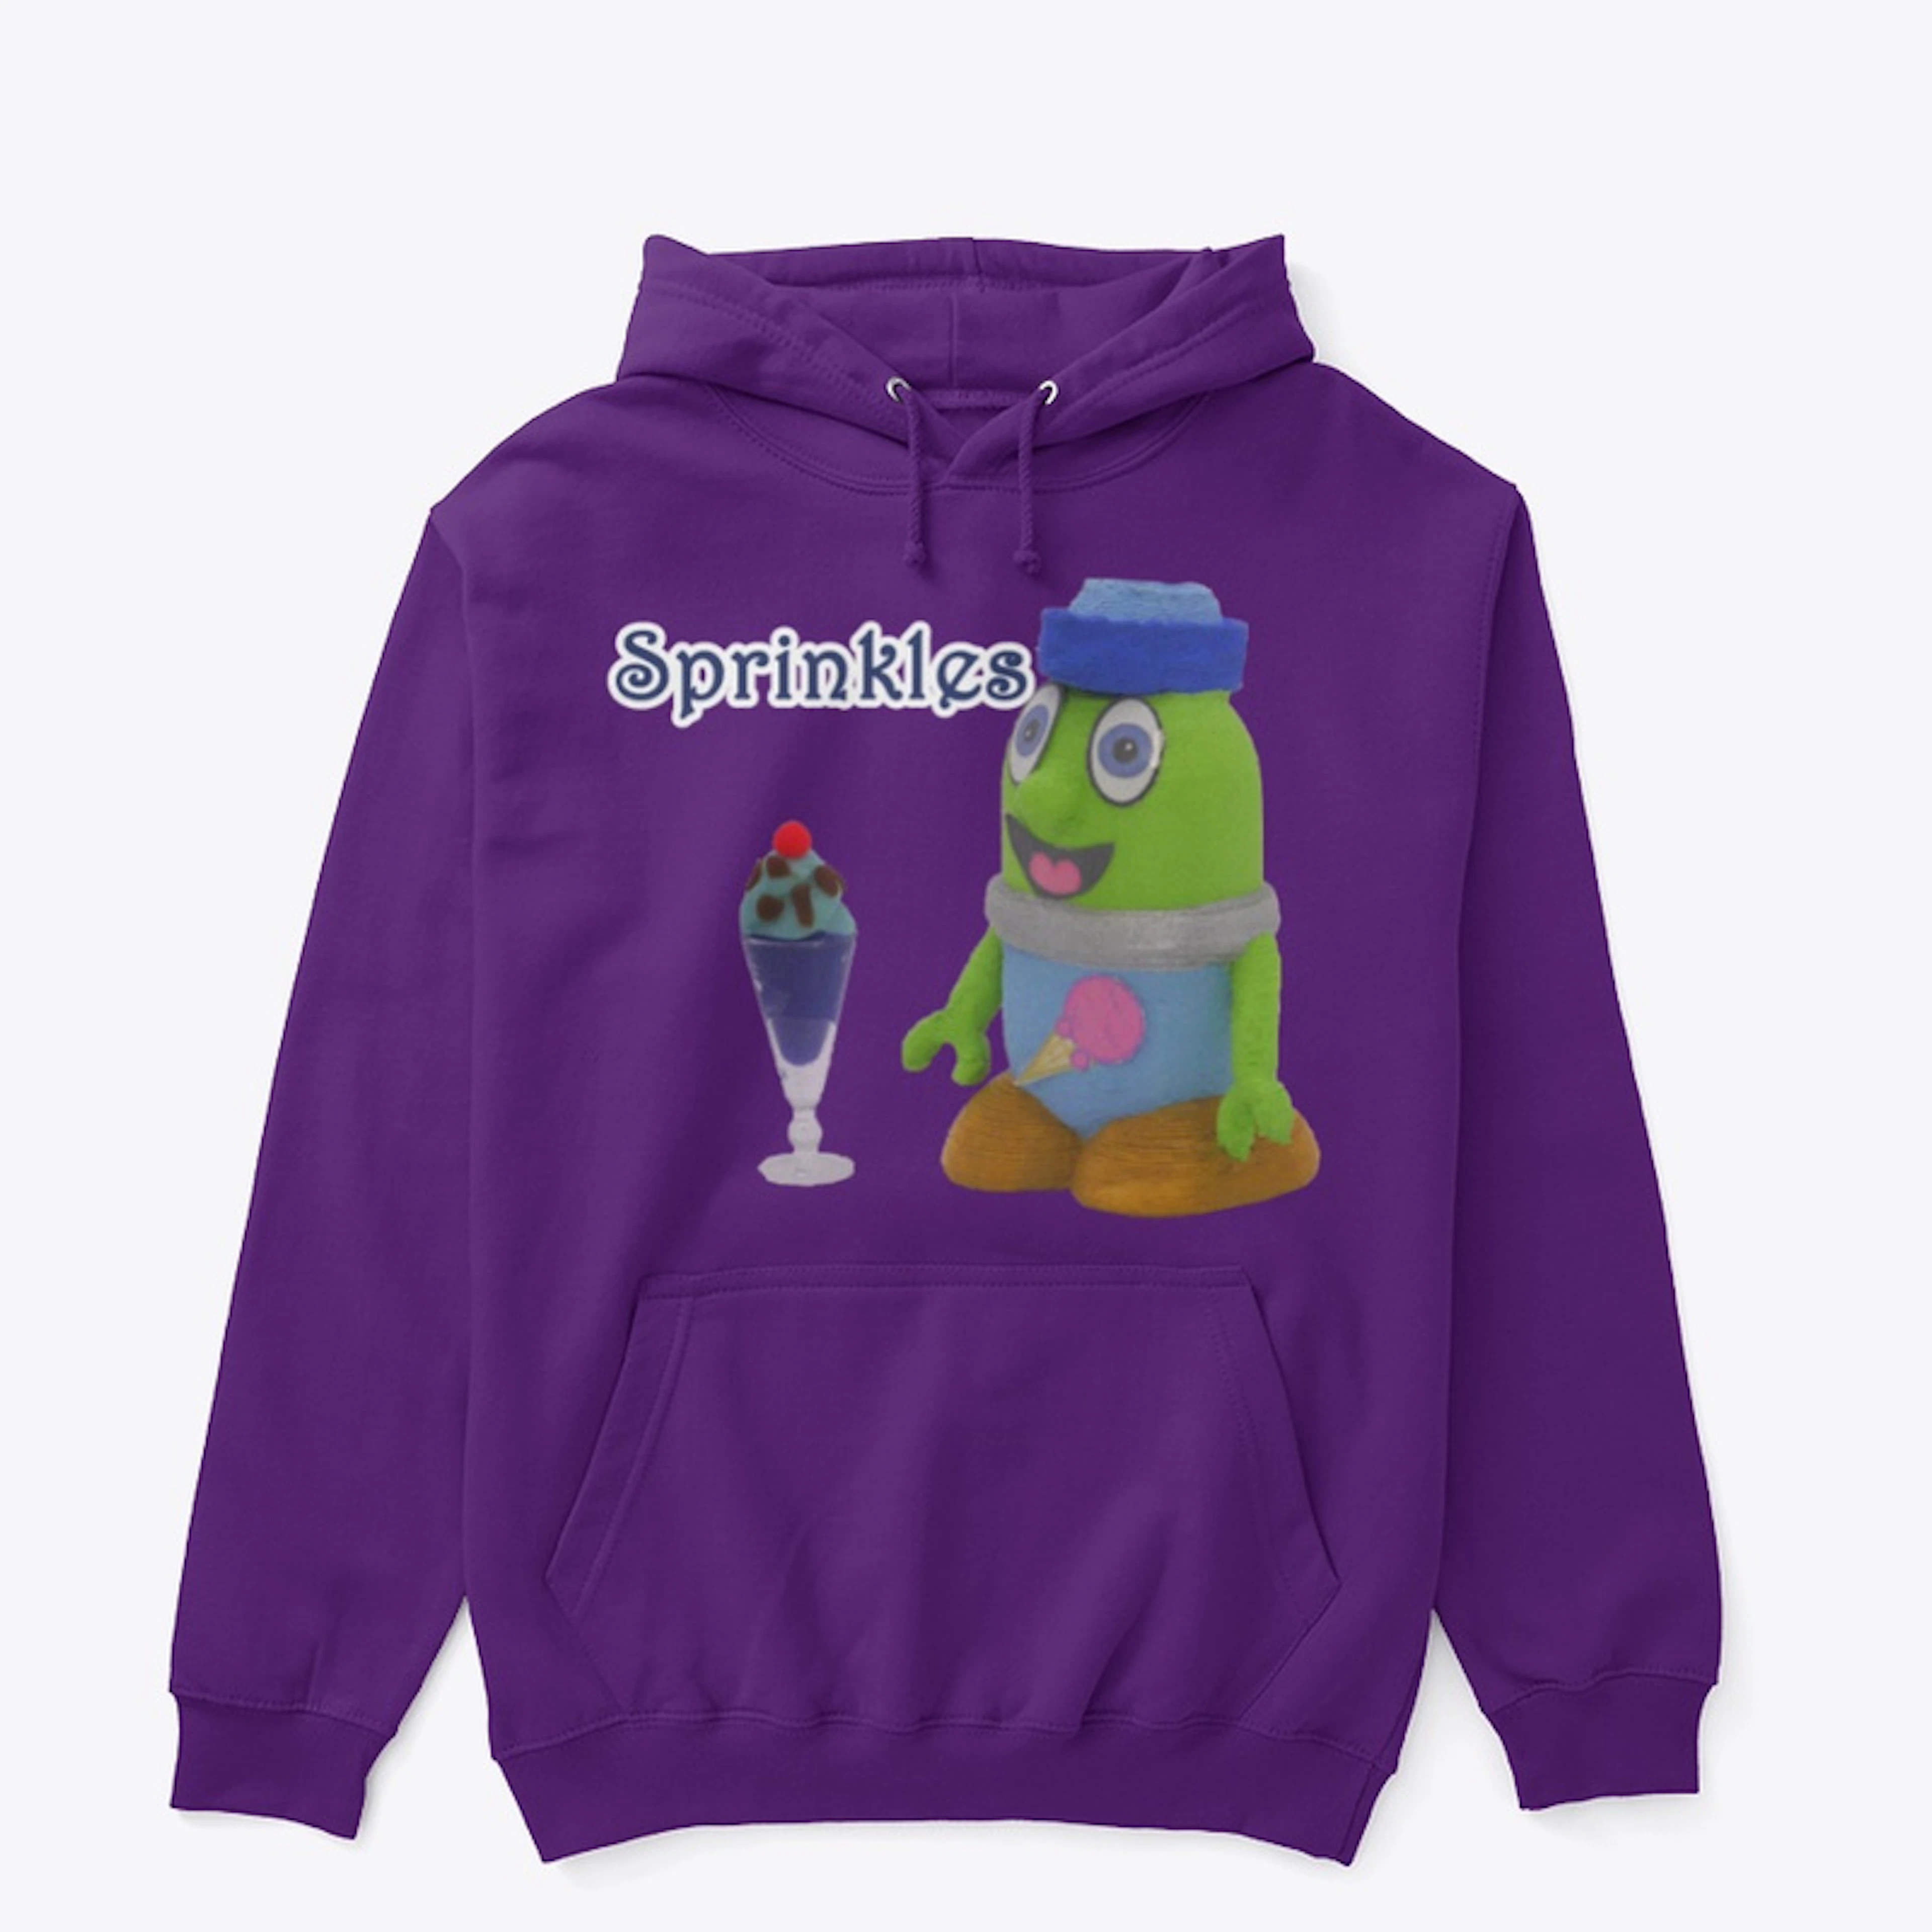 Classic Hoodie with Sprinkles